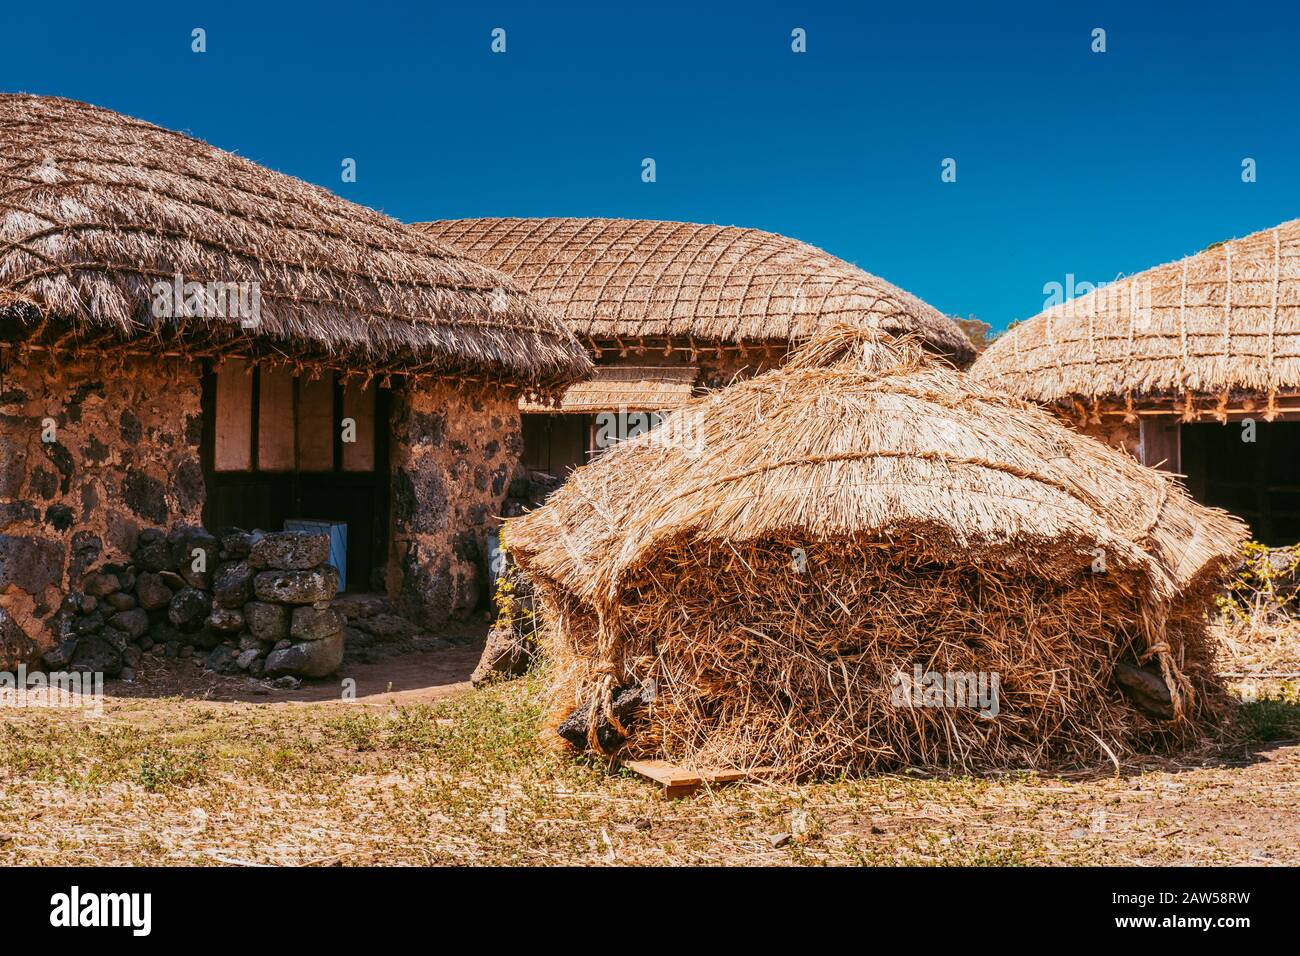 Traditional folk village. Thatched houses and blue sky. Straw hut roofs and clay walls with stones are still in a good condition. Stock Photo